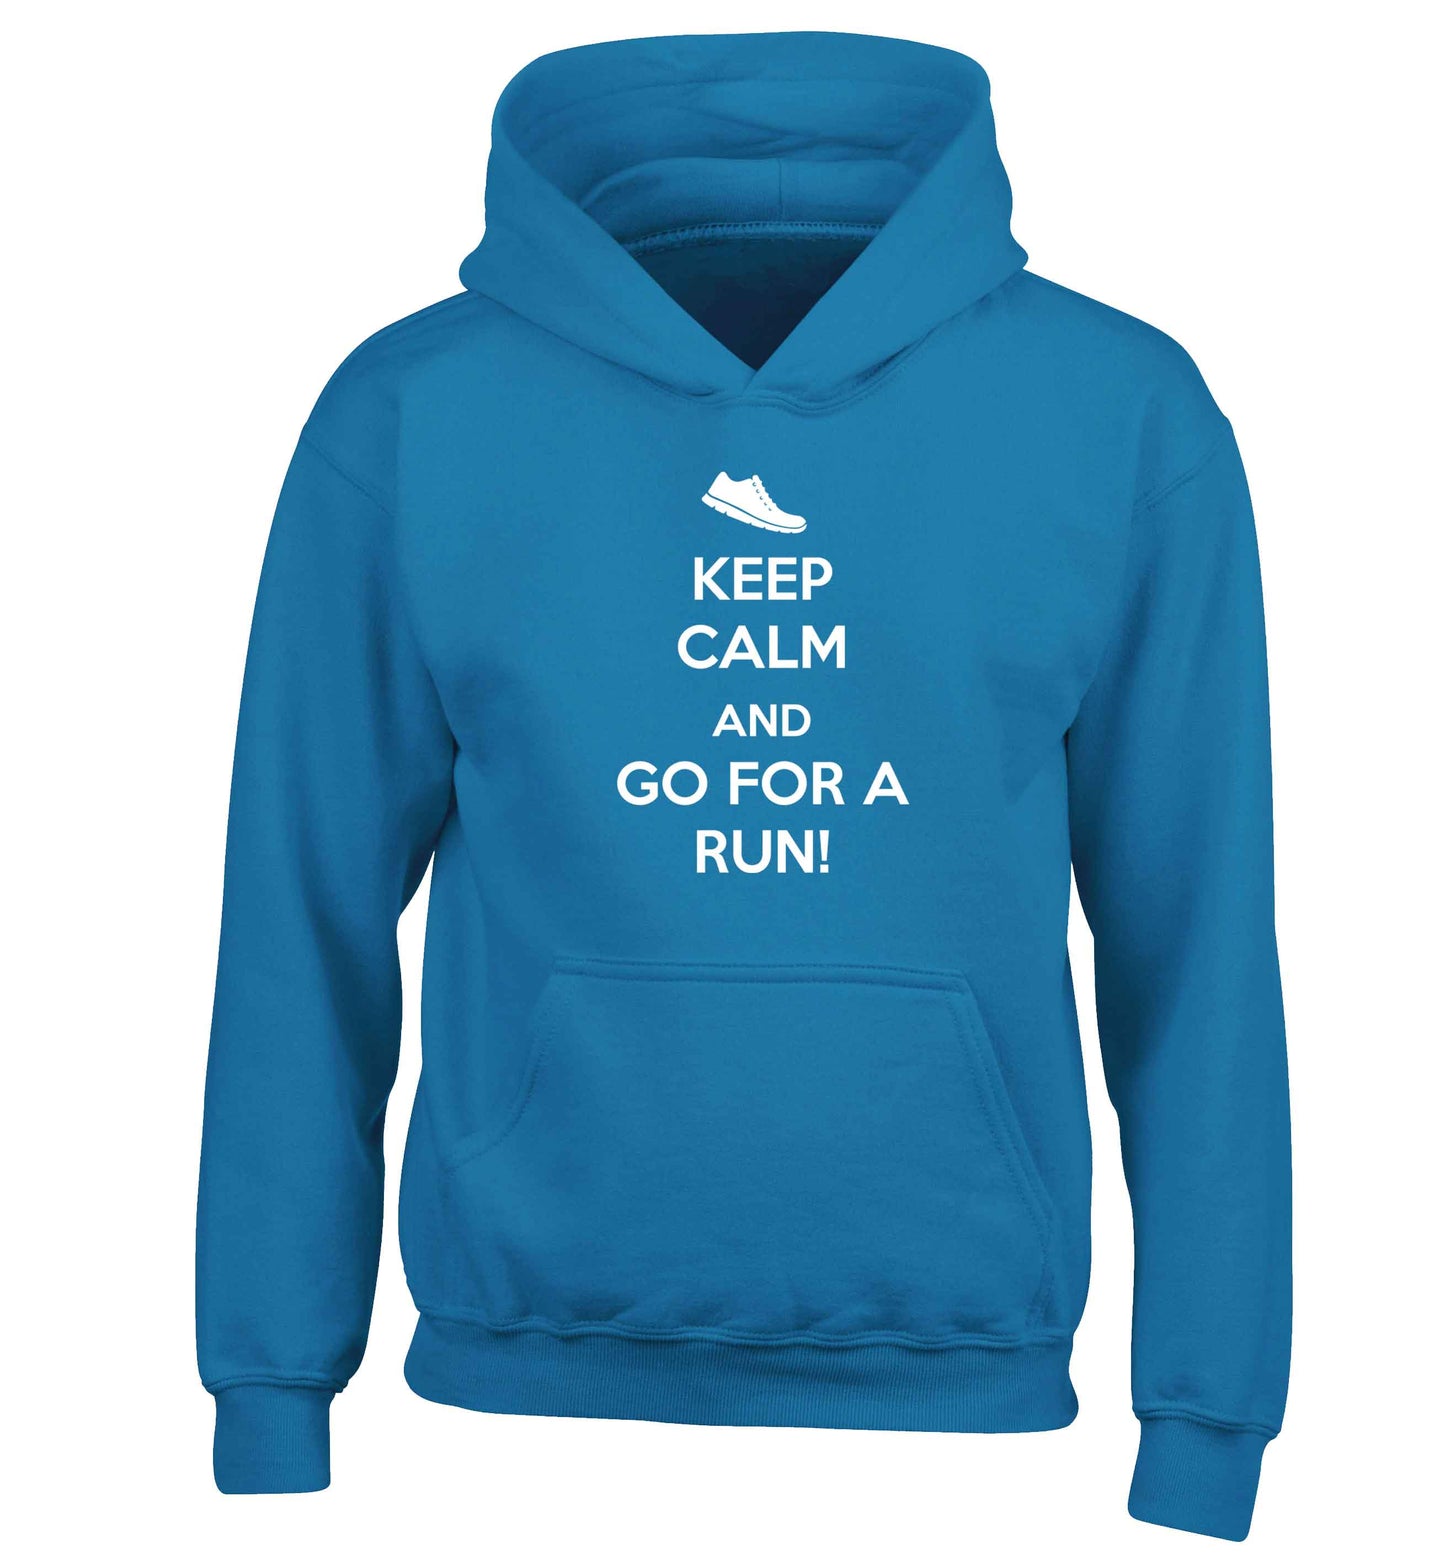 Keep calm and go for a run children's blue hoodie 12-13 Years